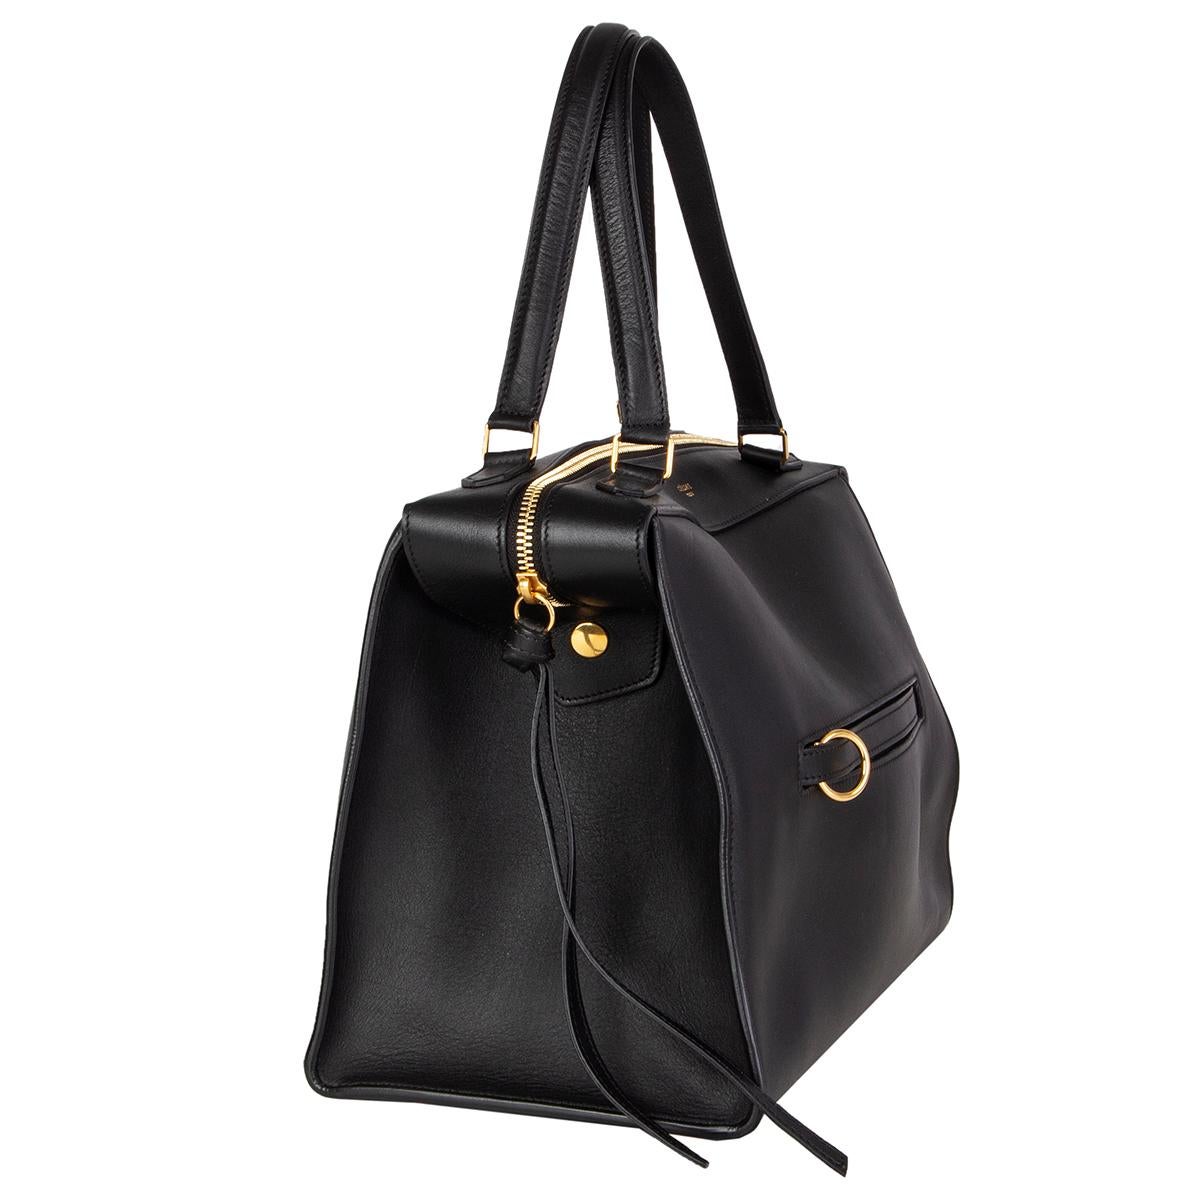 Céline 'Small Ring' handbag in black smooth calfskin with a ring zip pocket at front featuring gold-tone hardware. Opens with a zipper on top and is lined in midnight blue suede with one zip pocket against the back and two slit pockets attached. Has